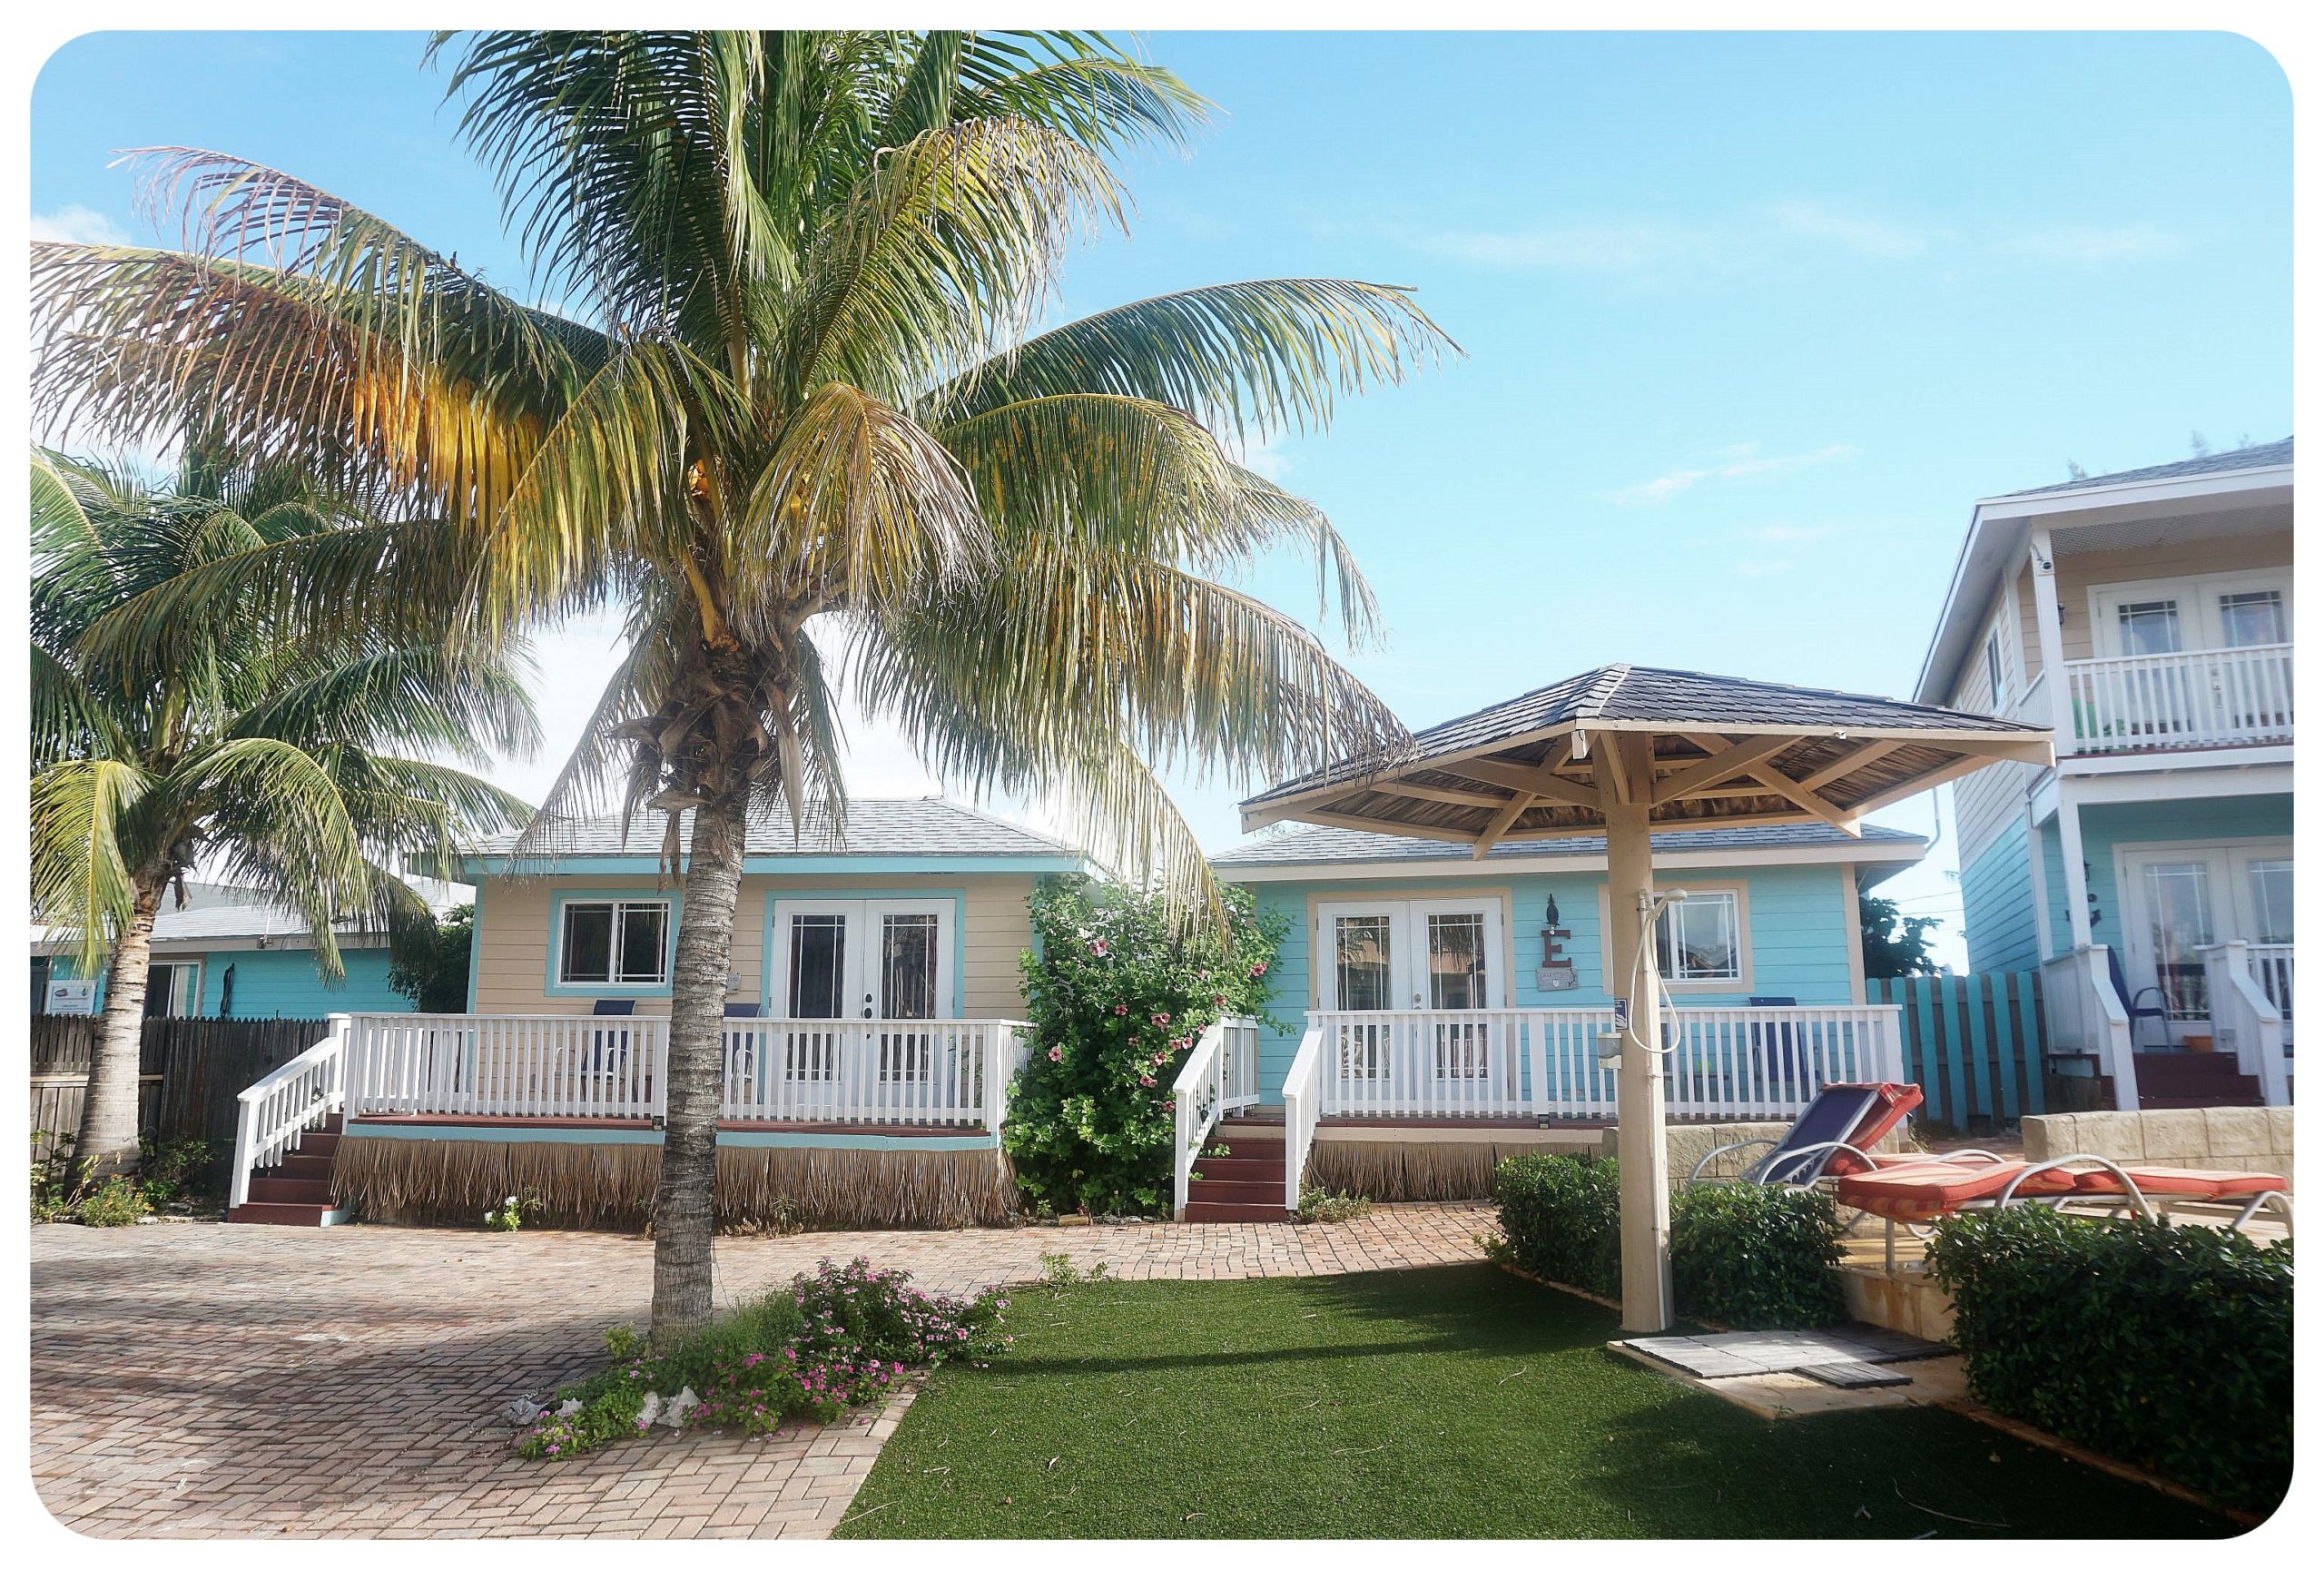 Where To Stay In Staniel Cay: Embrace Resort